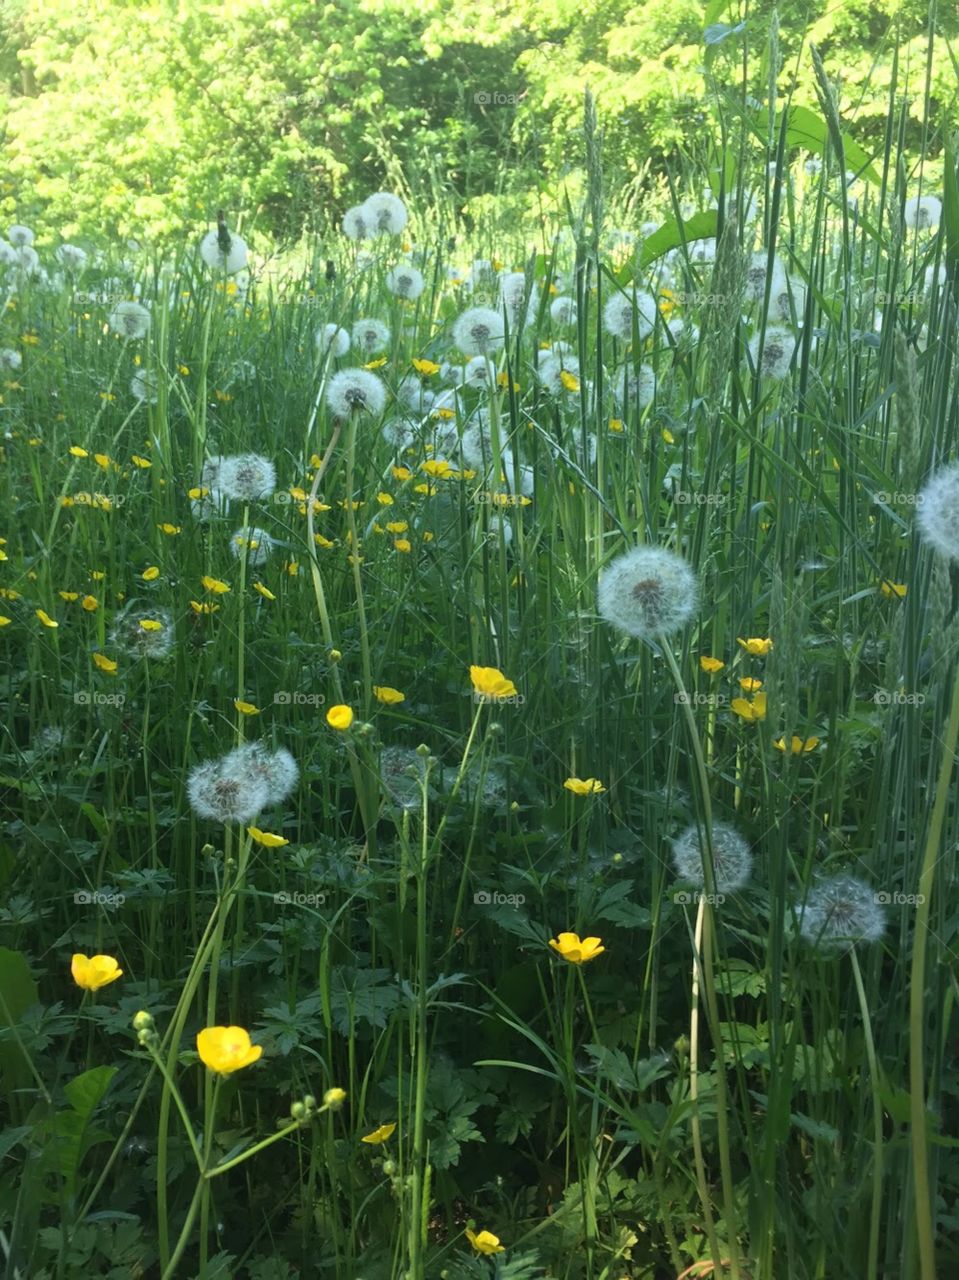 Field of wildflowers. Tall green grass with yellow dandelions and wispy, white weeds. 